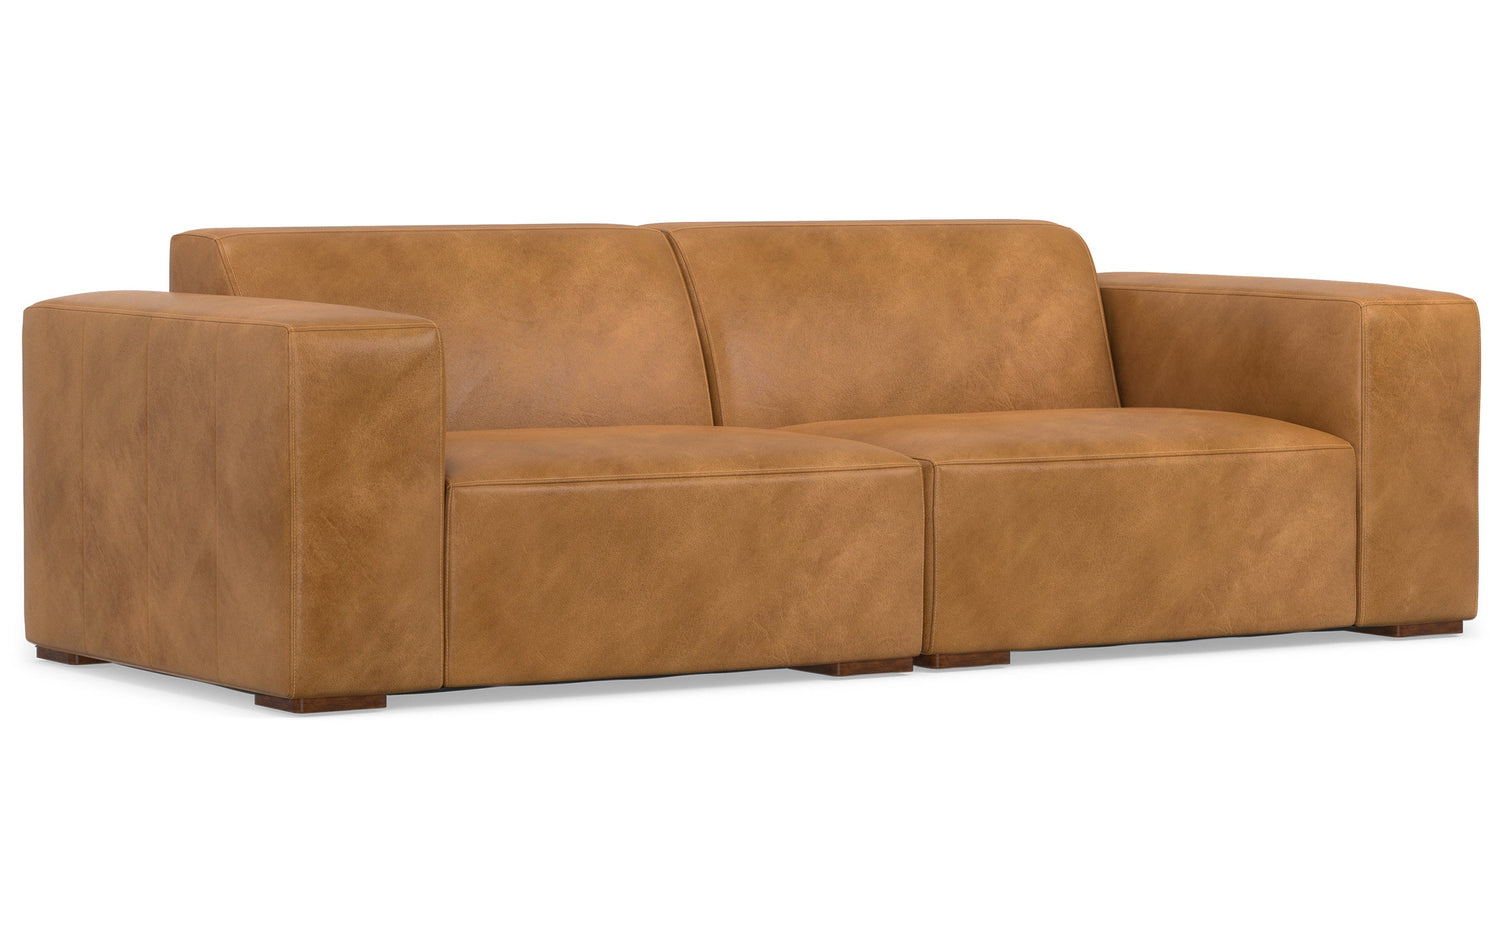 Sienna Genuine Leather | Rex 2 Seater Sofa in Genuine Leather